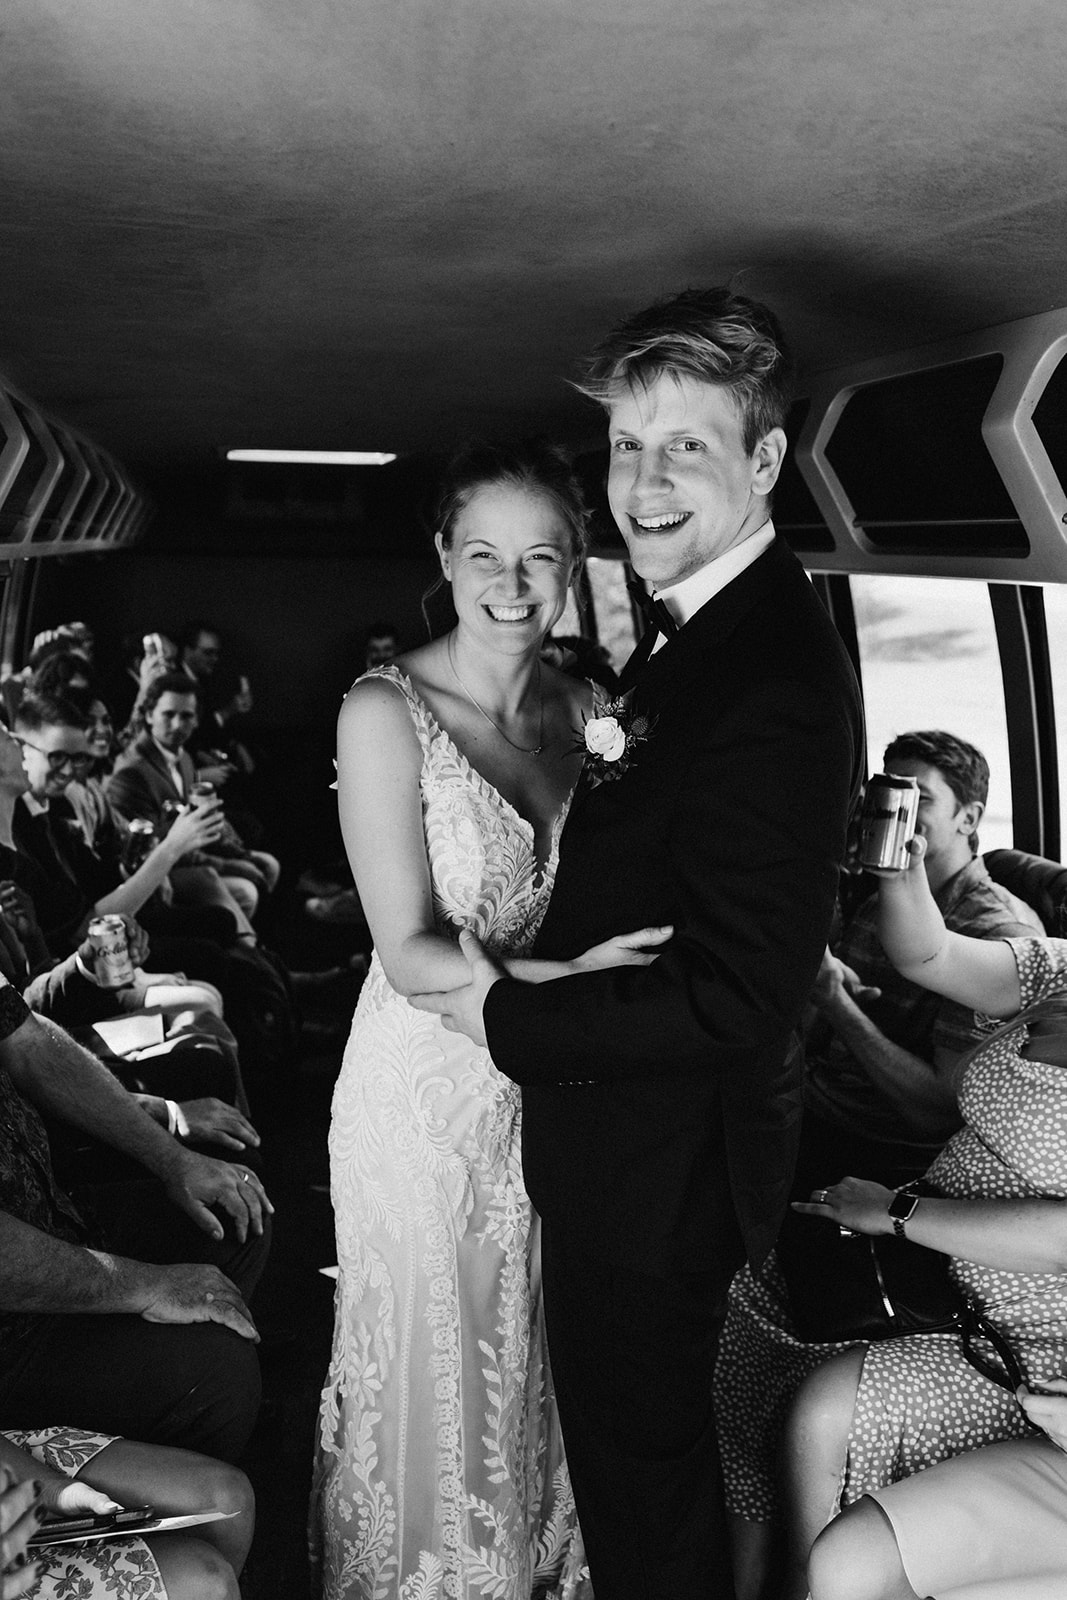 documentary and editorial outdoor wedding party bus brianna kirk photography 